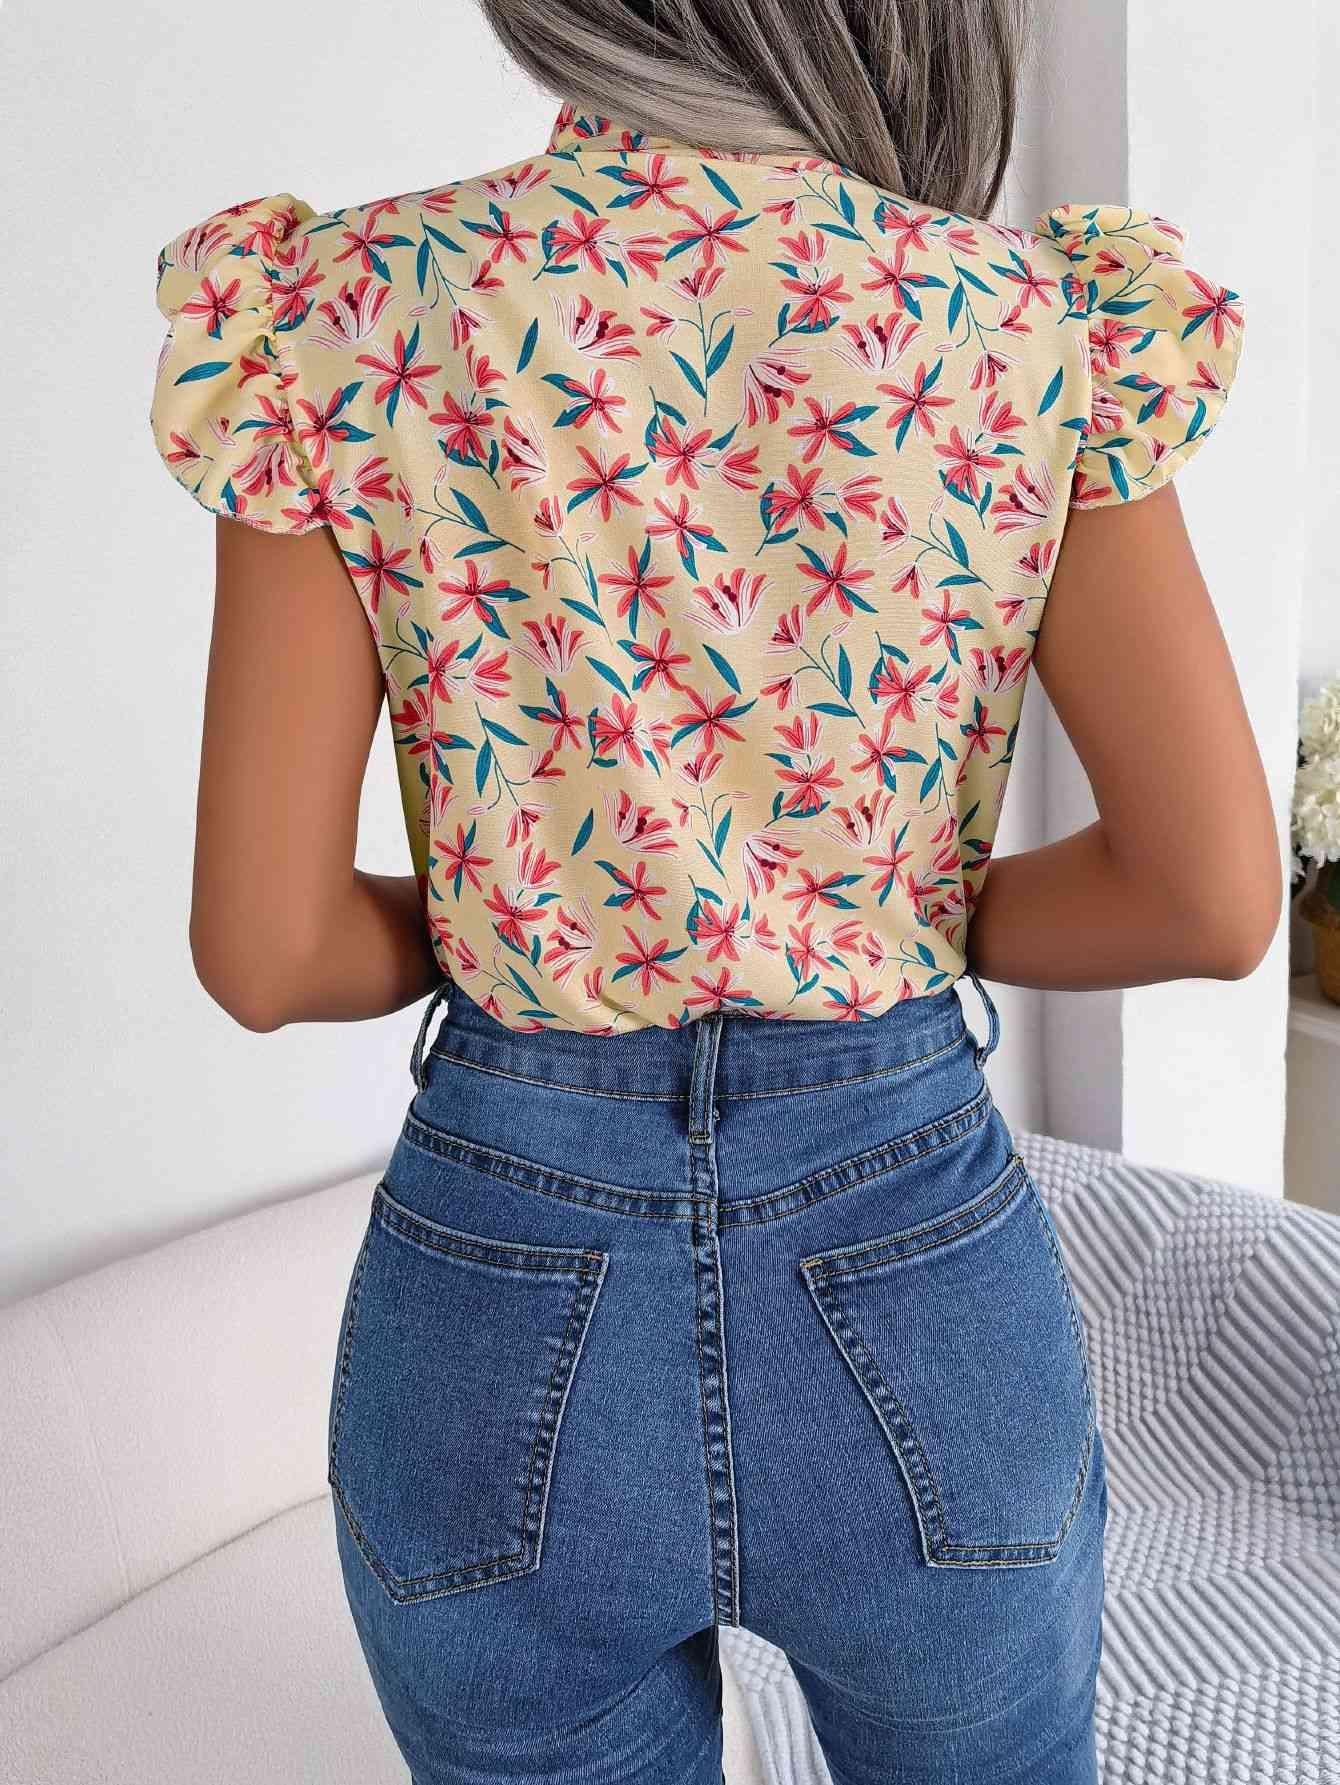 the back of a woman wearing a floral top